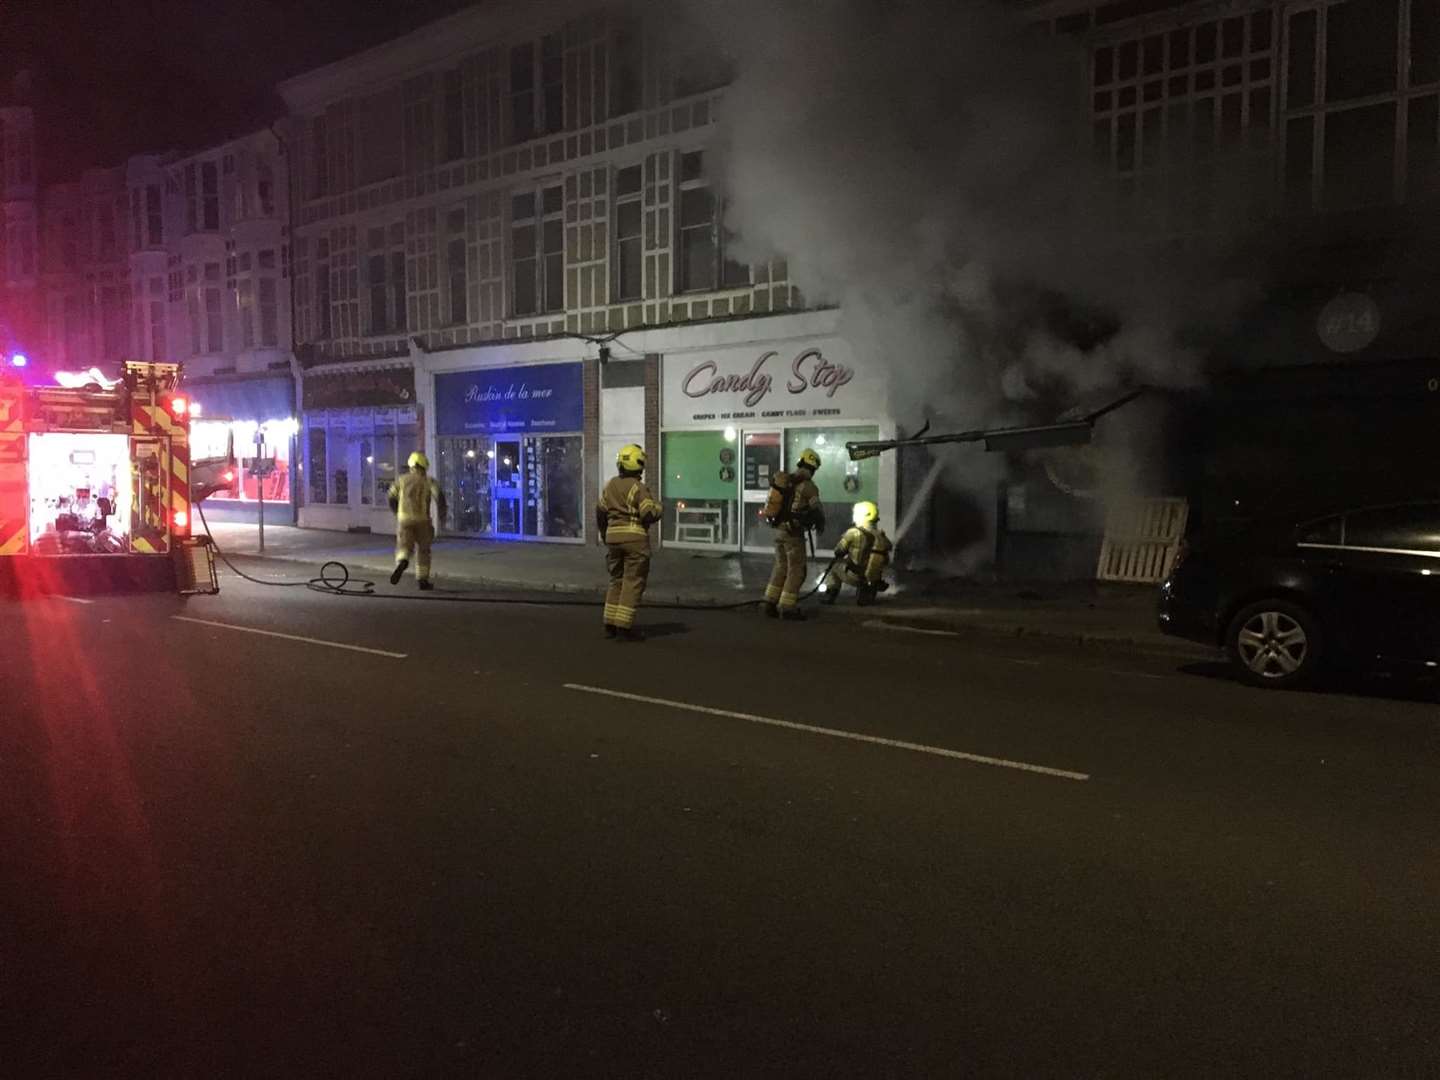 The fire at GB Pizza Co in Margate. Picture: Sam Castle